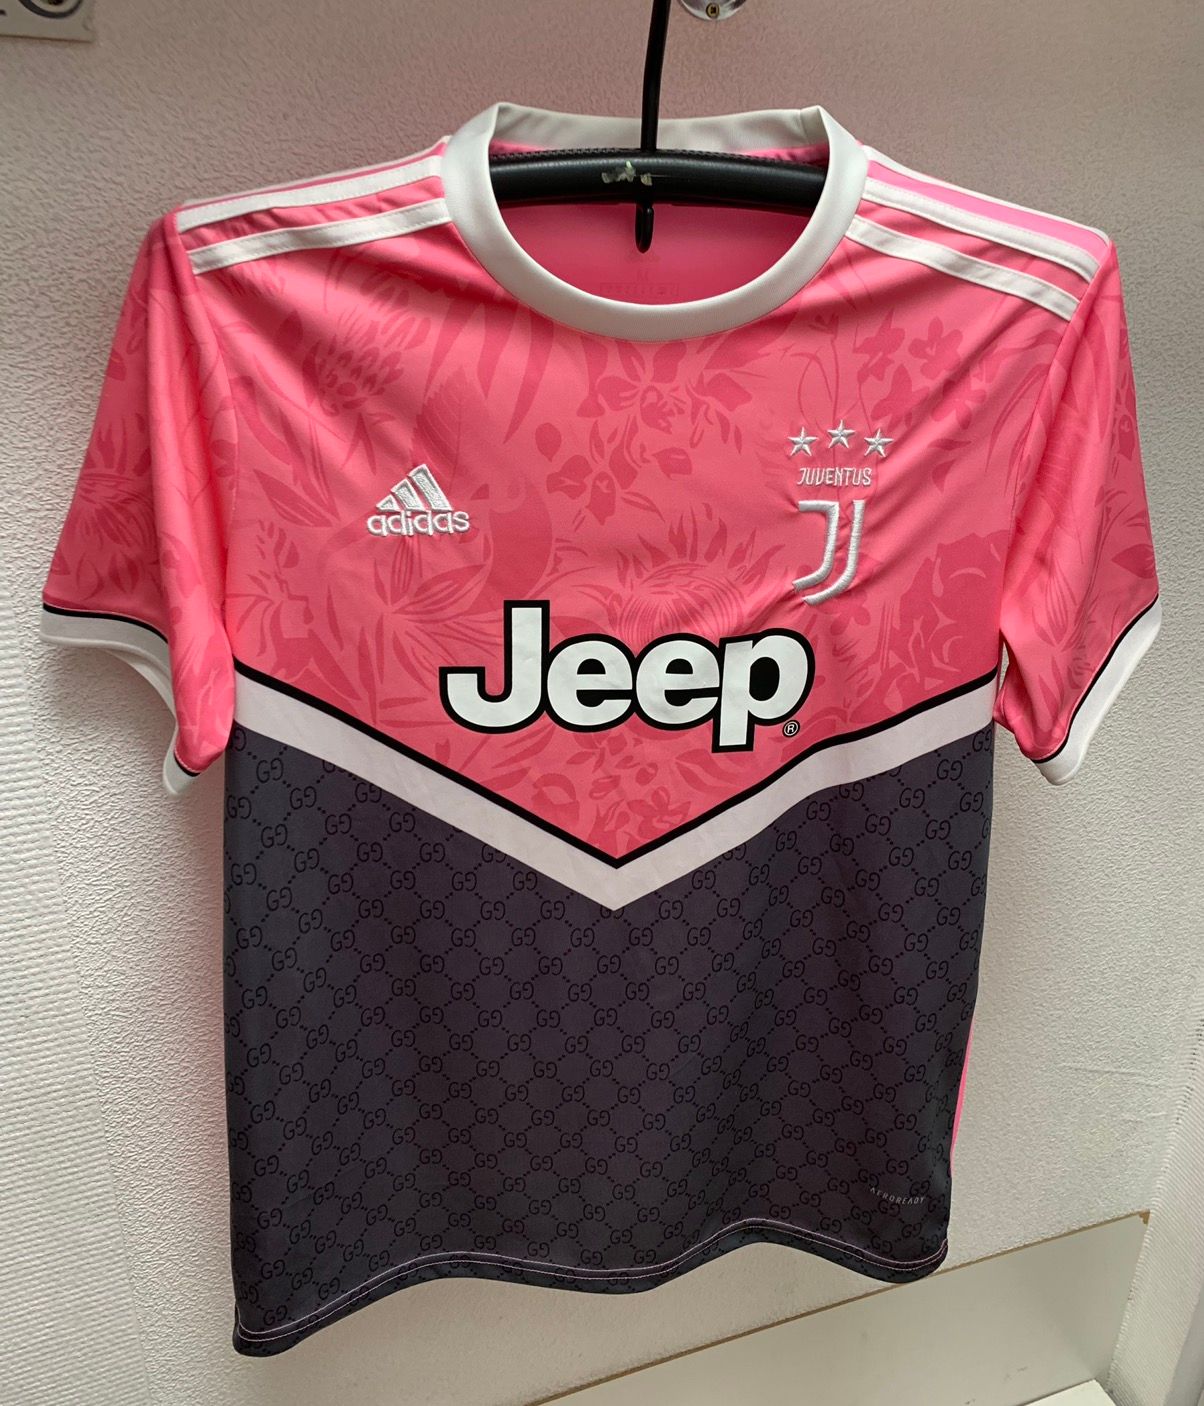 Pre-owned Jersey X Soccer Jersey Juventus Adidas Gucci Soccer Jersey Jeep M Size In Pink